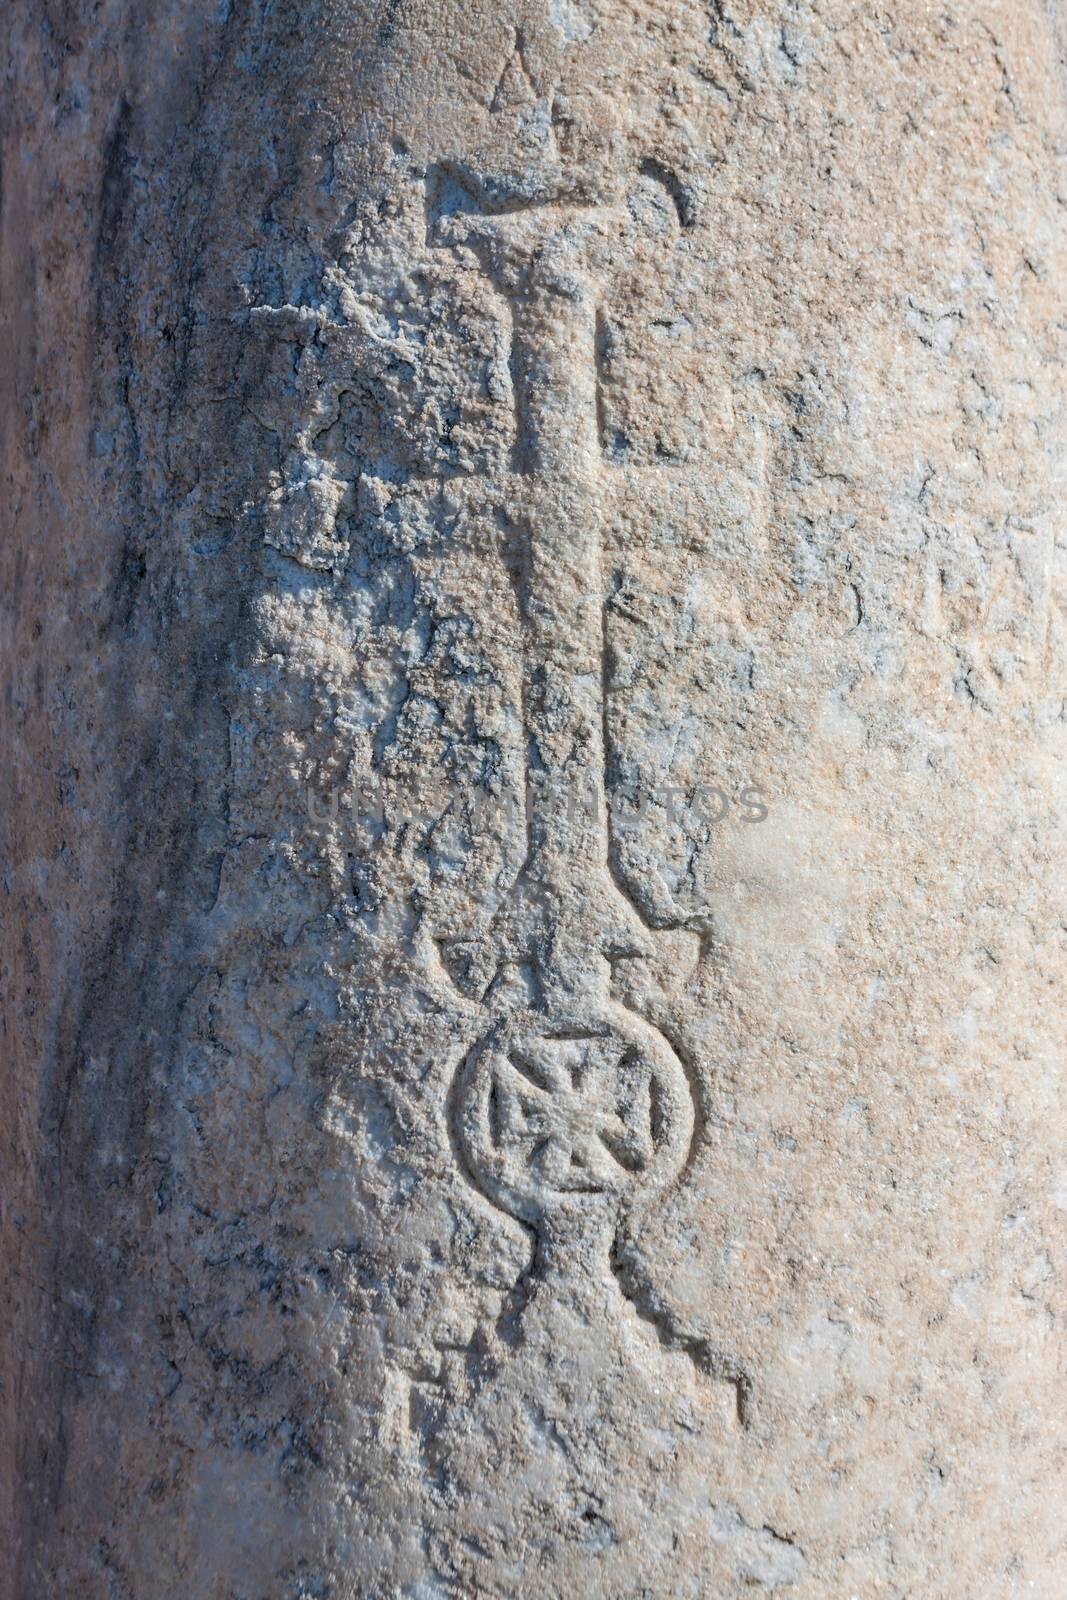 Christian Cross Carved in Stone at Selcuk in Turkey by Creatista